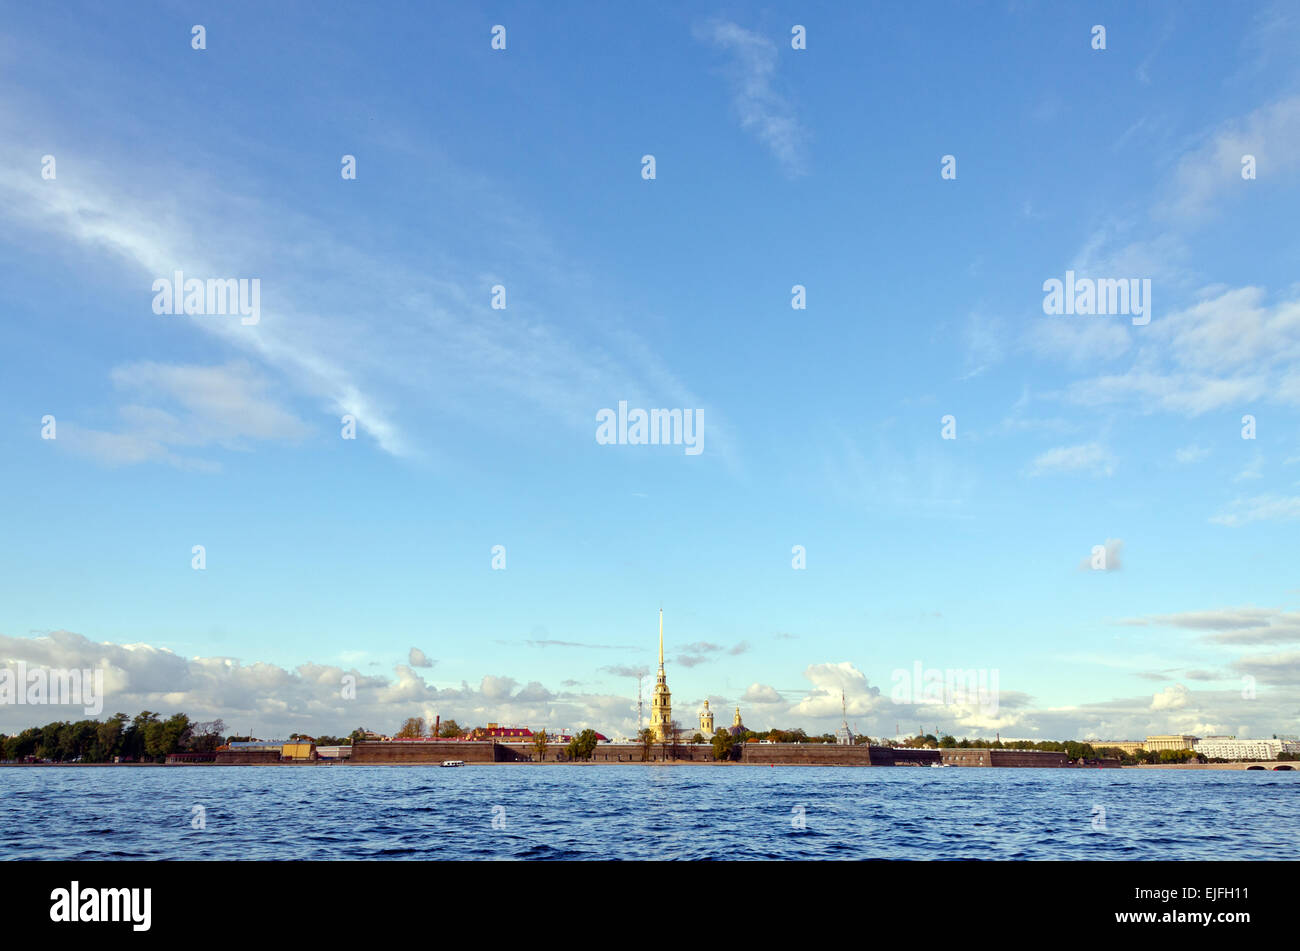 View of St. Petersburg and Neva river in the evening Stock Photo